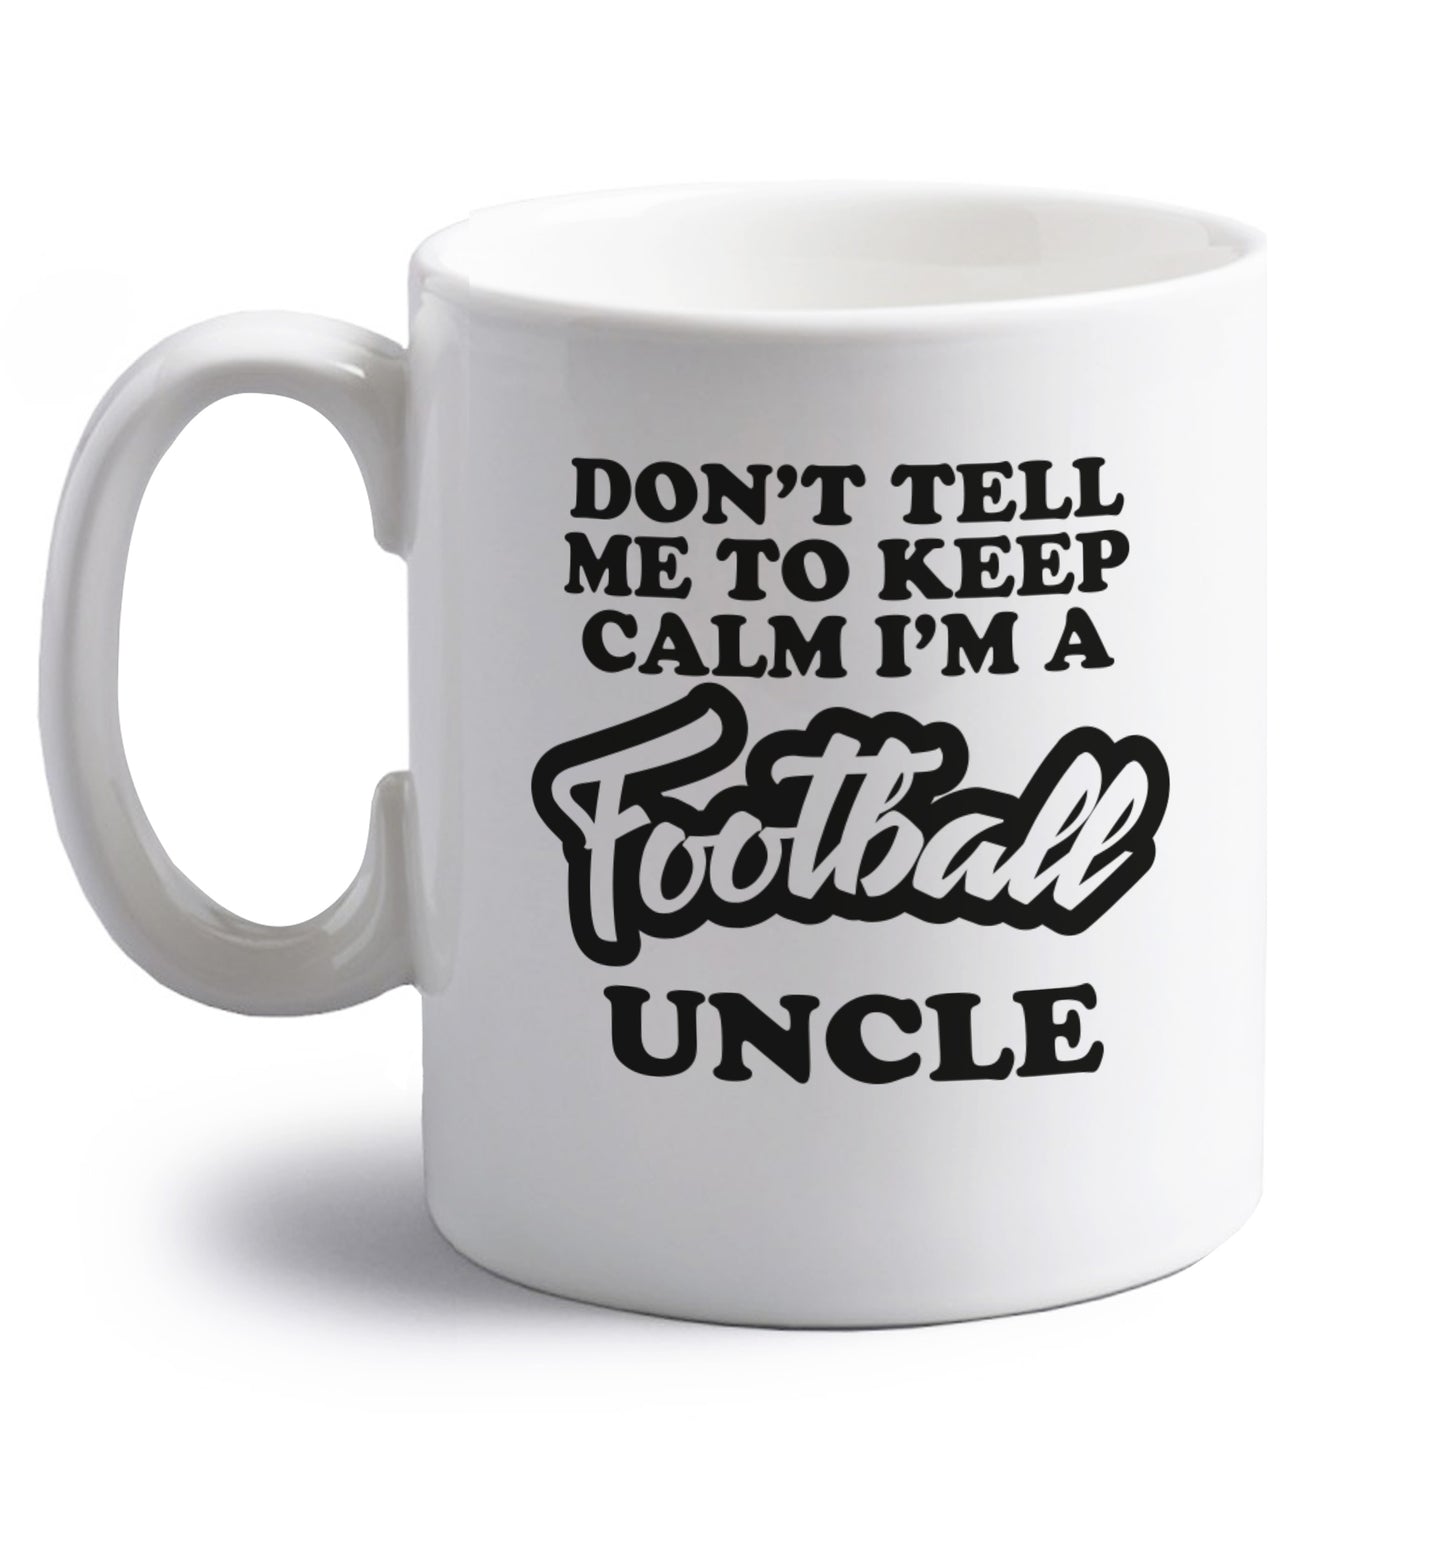 Don't tell me to keep calm I'm a football uncle right handed white ceramic mug 